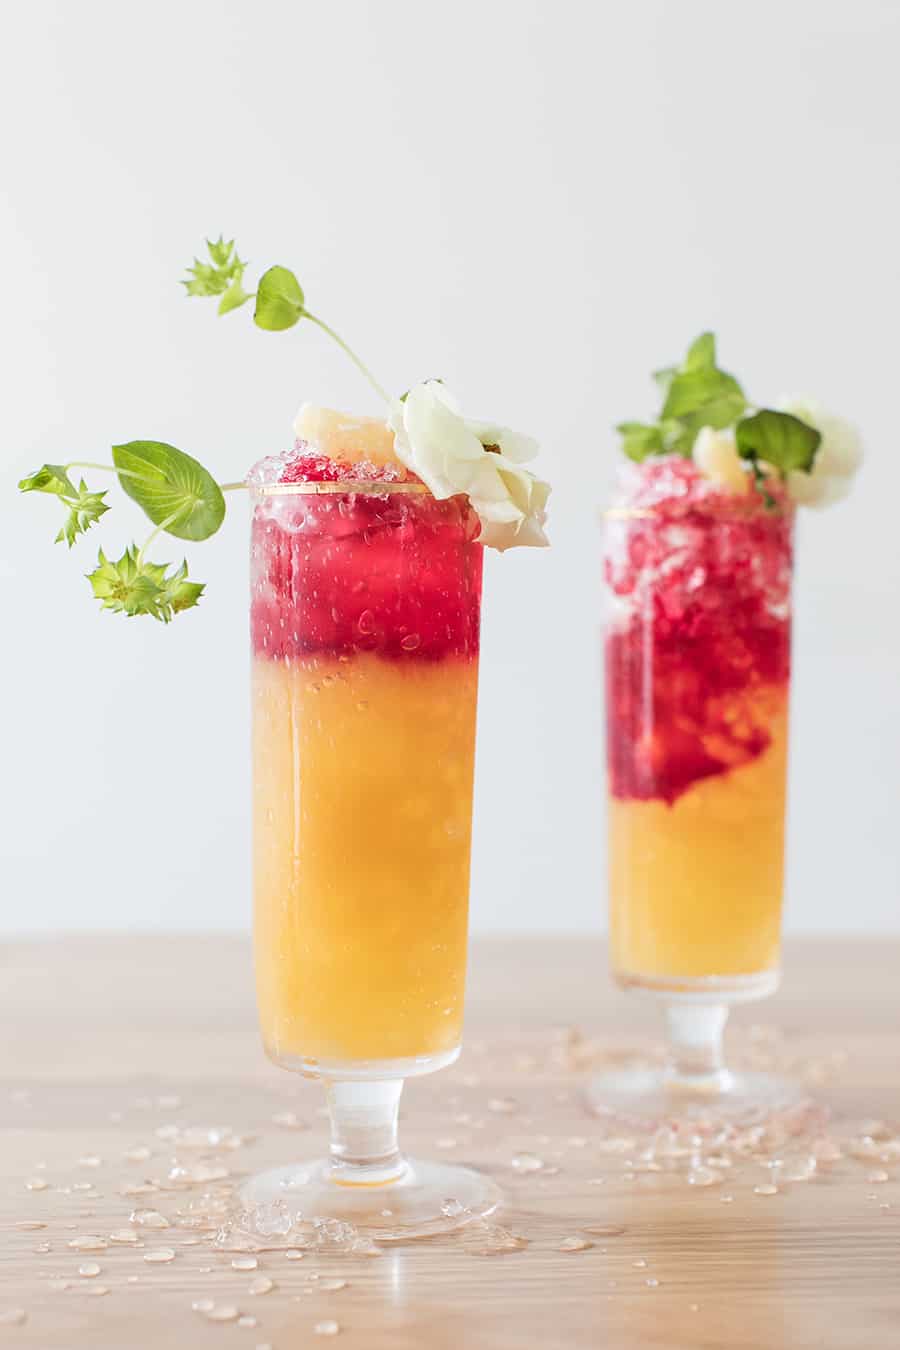 Pineapple tequila cocktail with beet juice and flowers